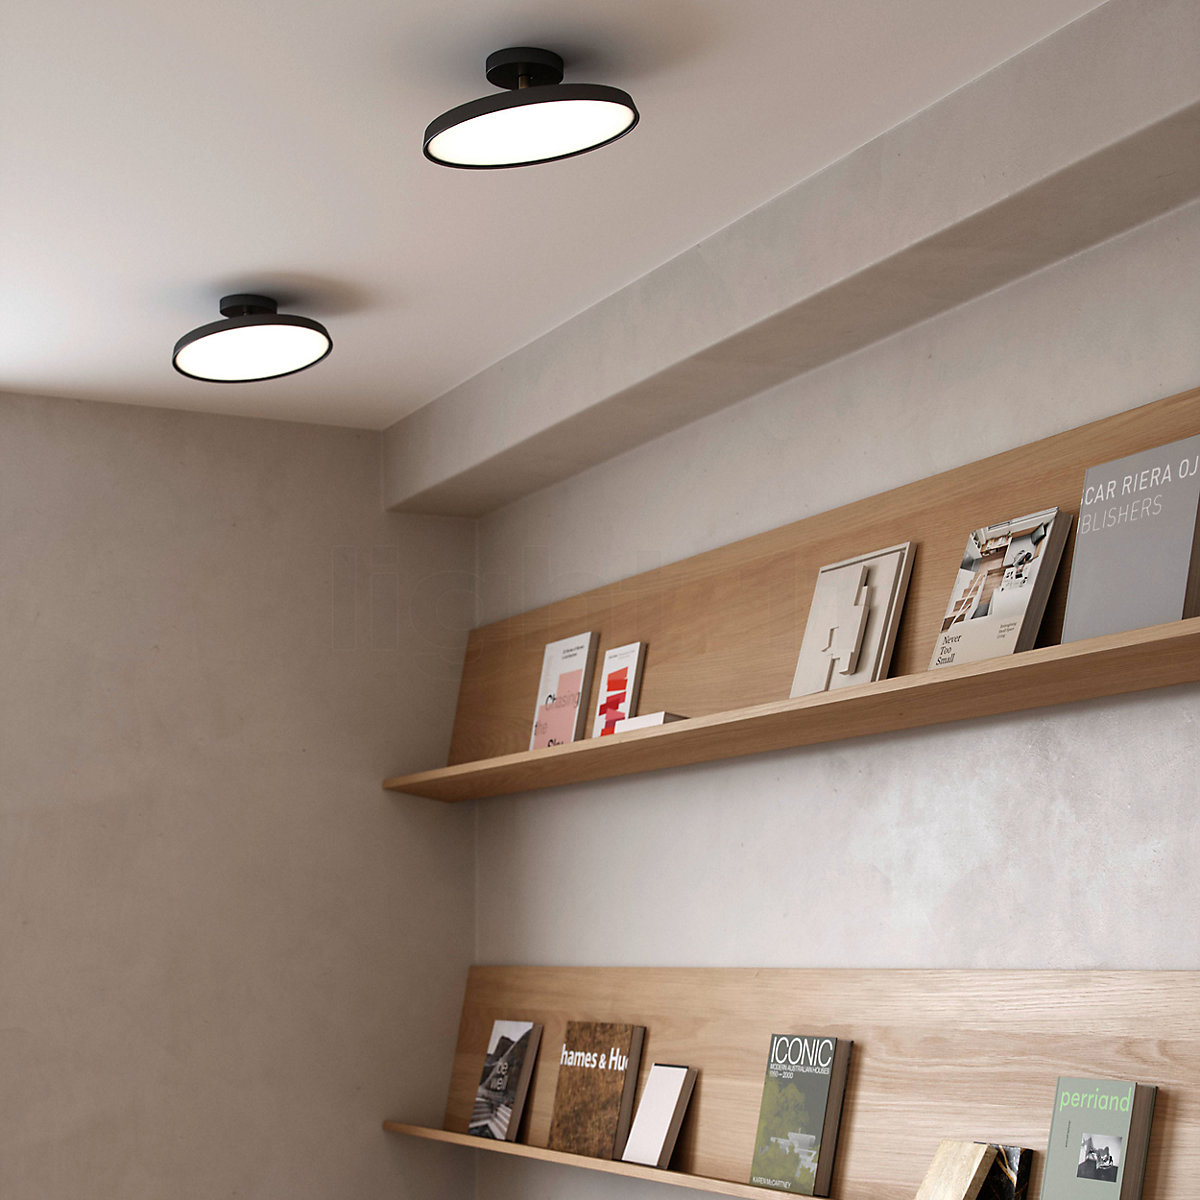 Buy Design Ceiling for the Kaito Light at LED Pro People